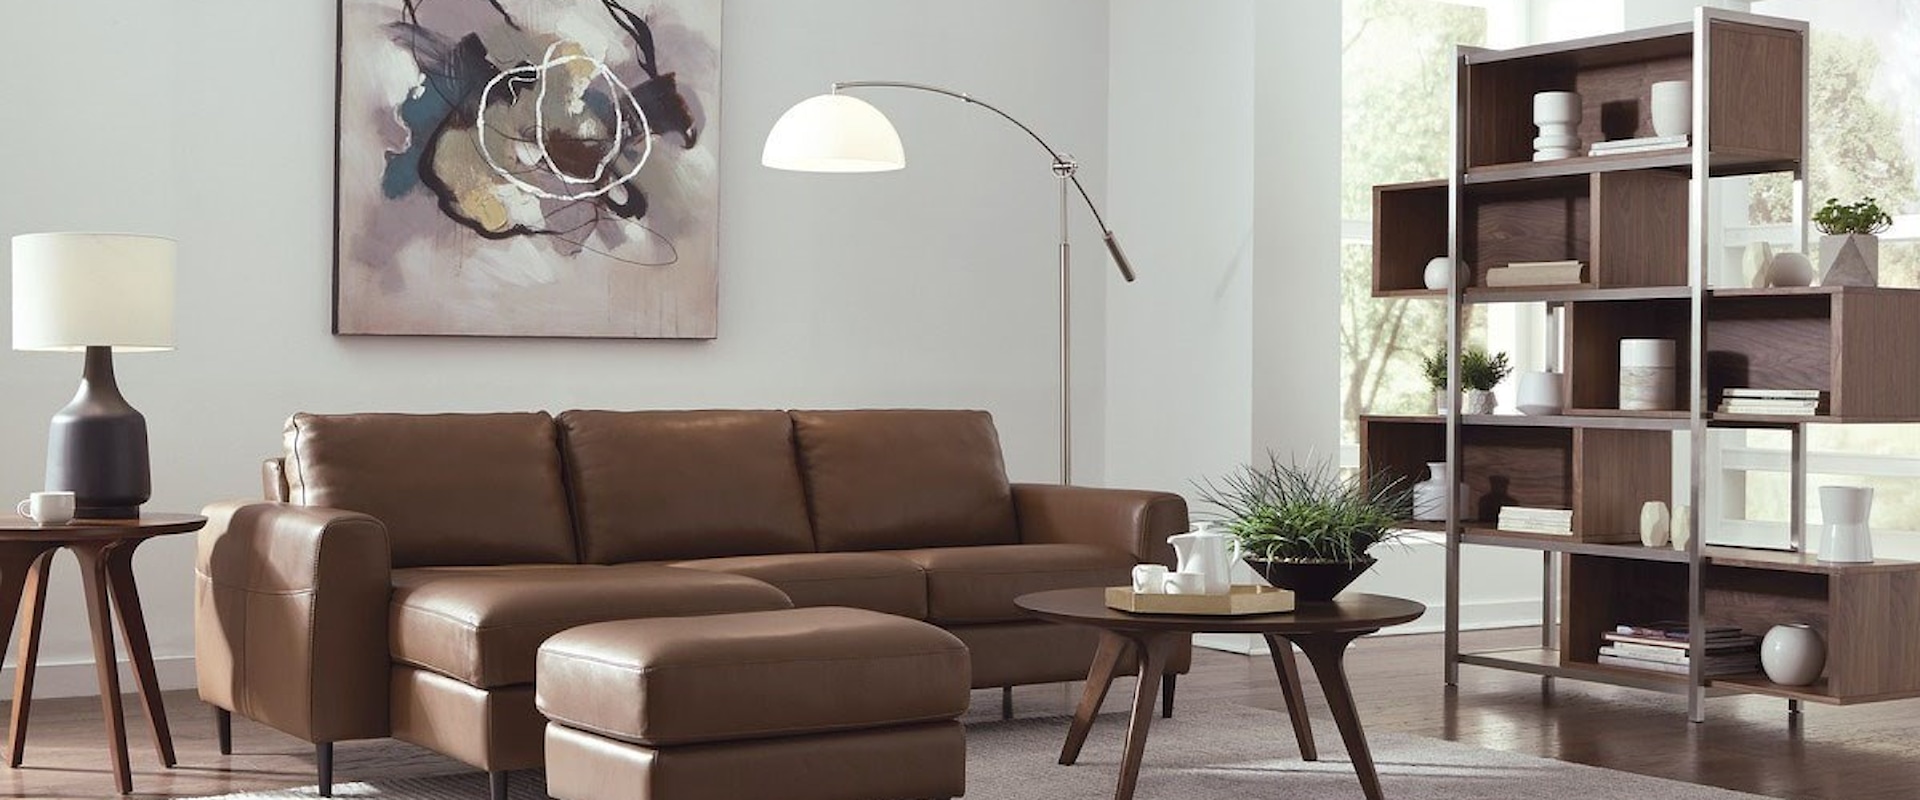 Contemporary Living Room Group